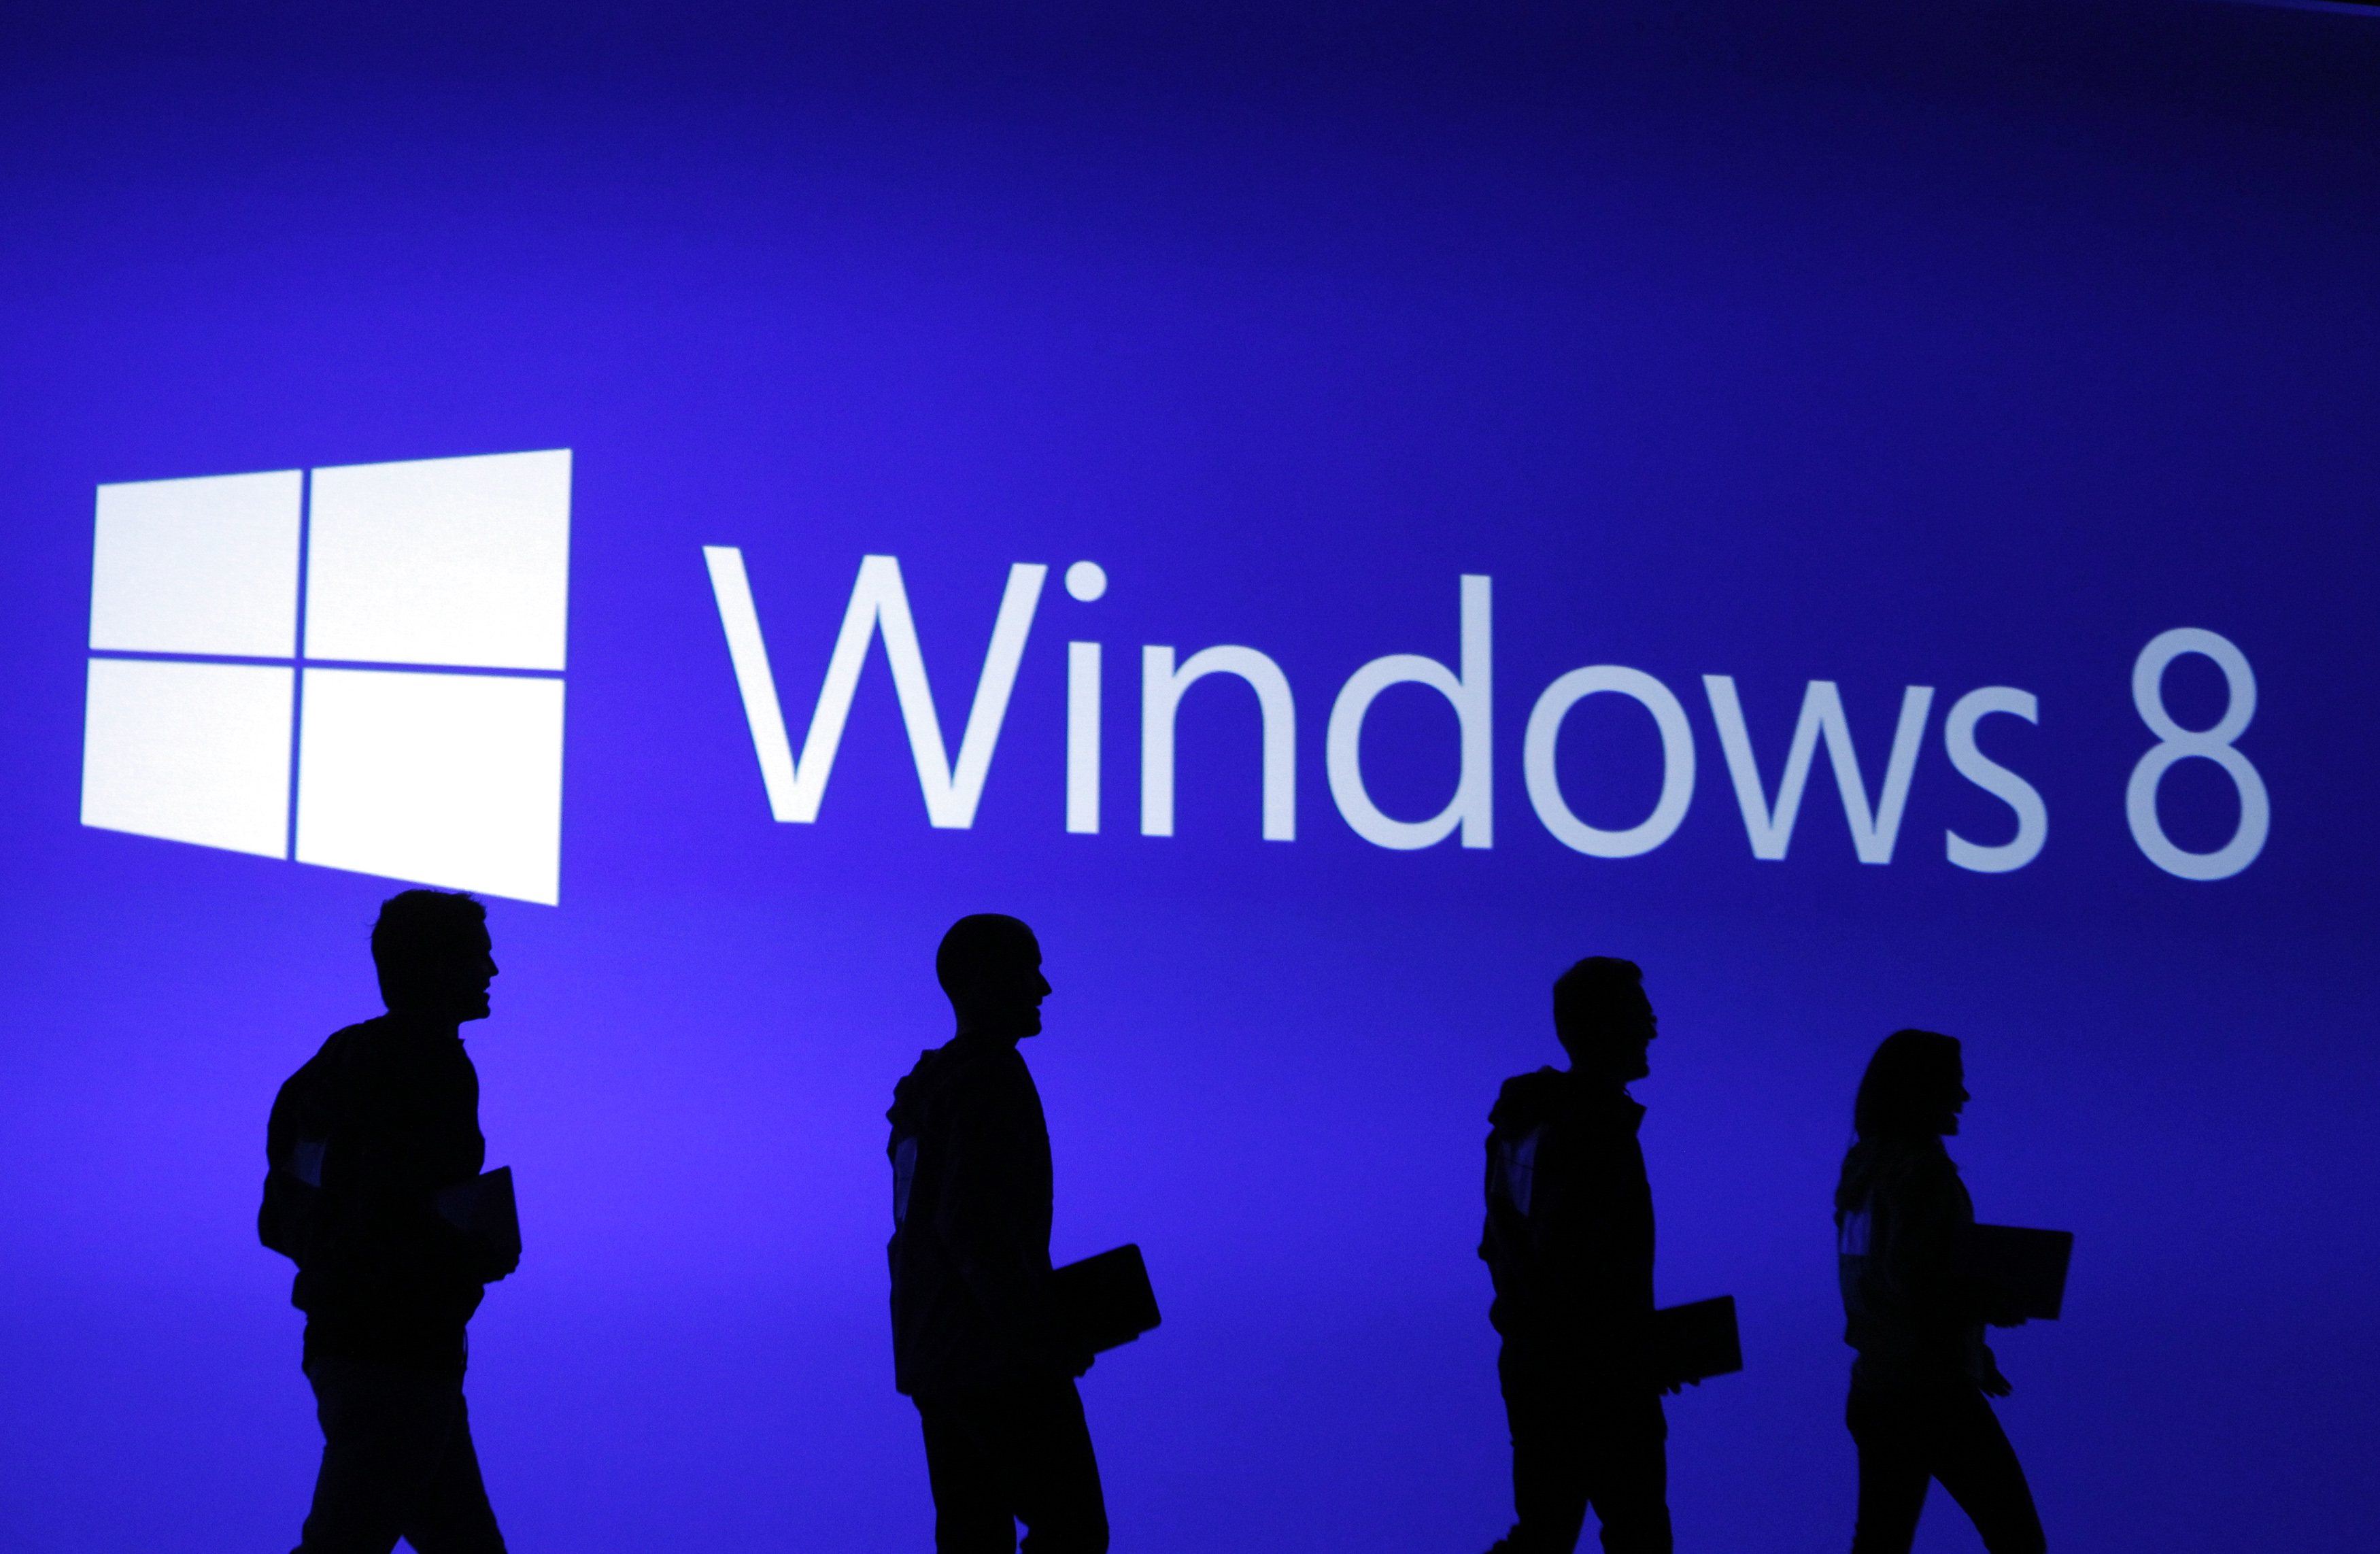 Microsoft reboots Windows 8 after mixed reception